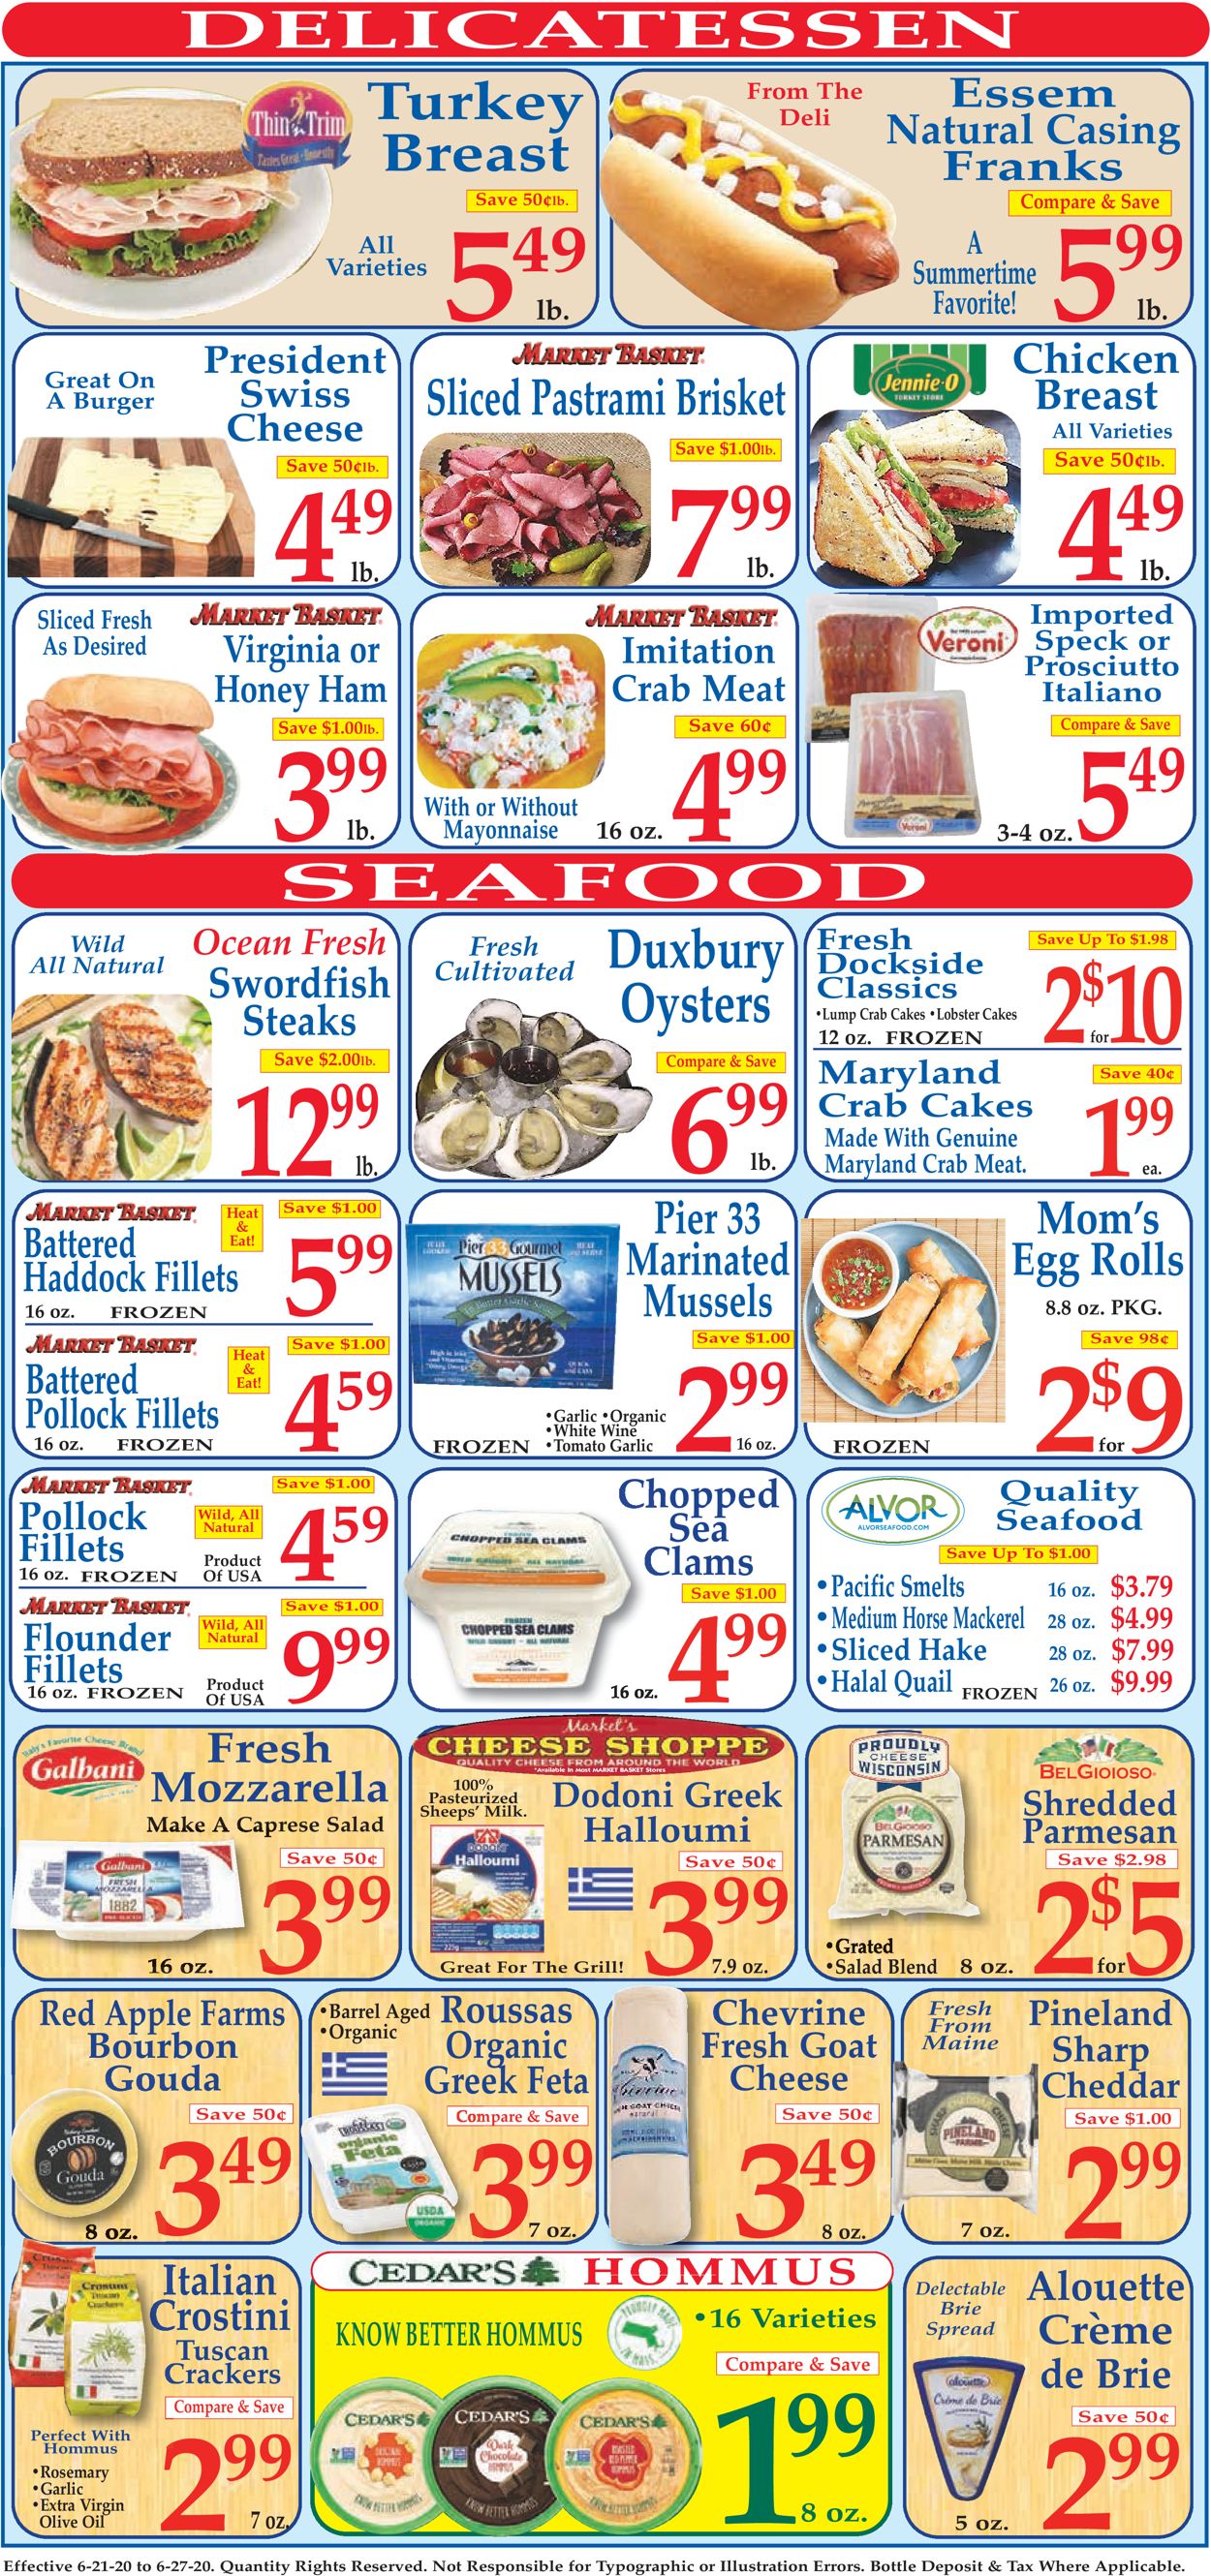 Market Basket Ad from 06/21/2020